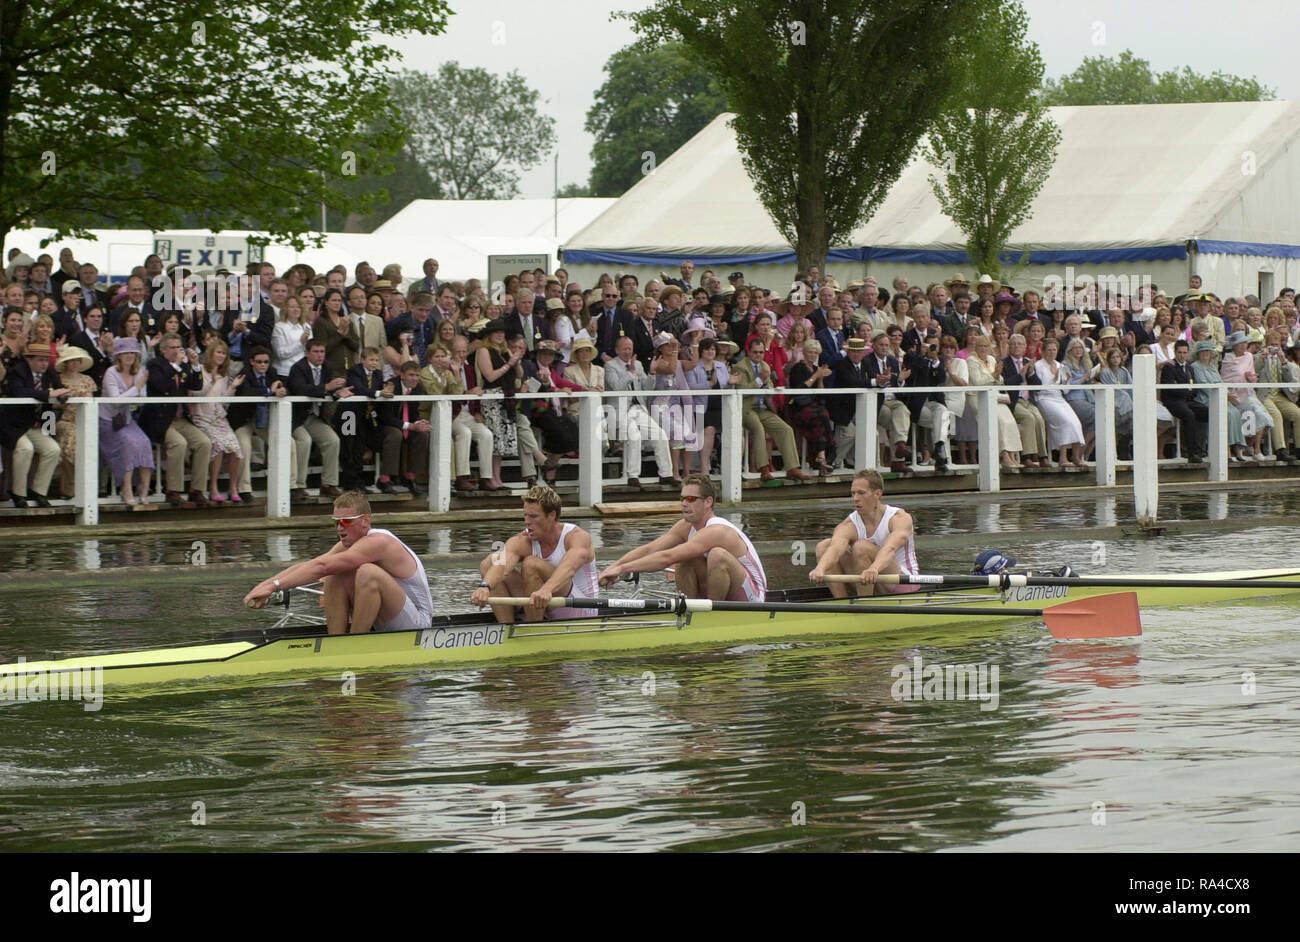 05/07/03/03  2003 Henley Royal Regatta - Sat Prince Philip Challenge Cup Leander Club rowing past the Stewards' Enclosure to win and go through to Sundays final. Left to Right  Stroke Matthew Pinsent, 3. James Cracknell, 2. Toby Smith and bow Chris Lloyd; cox Christian Cormack Stock Photo